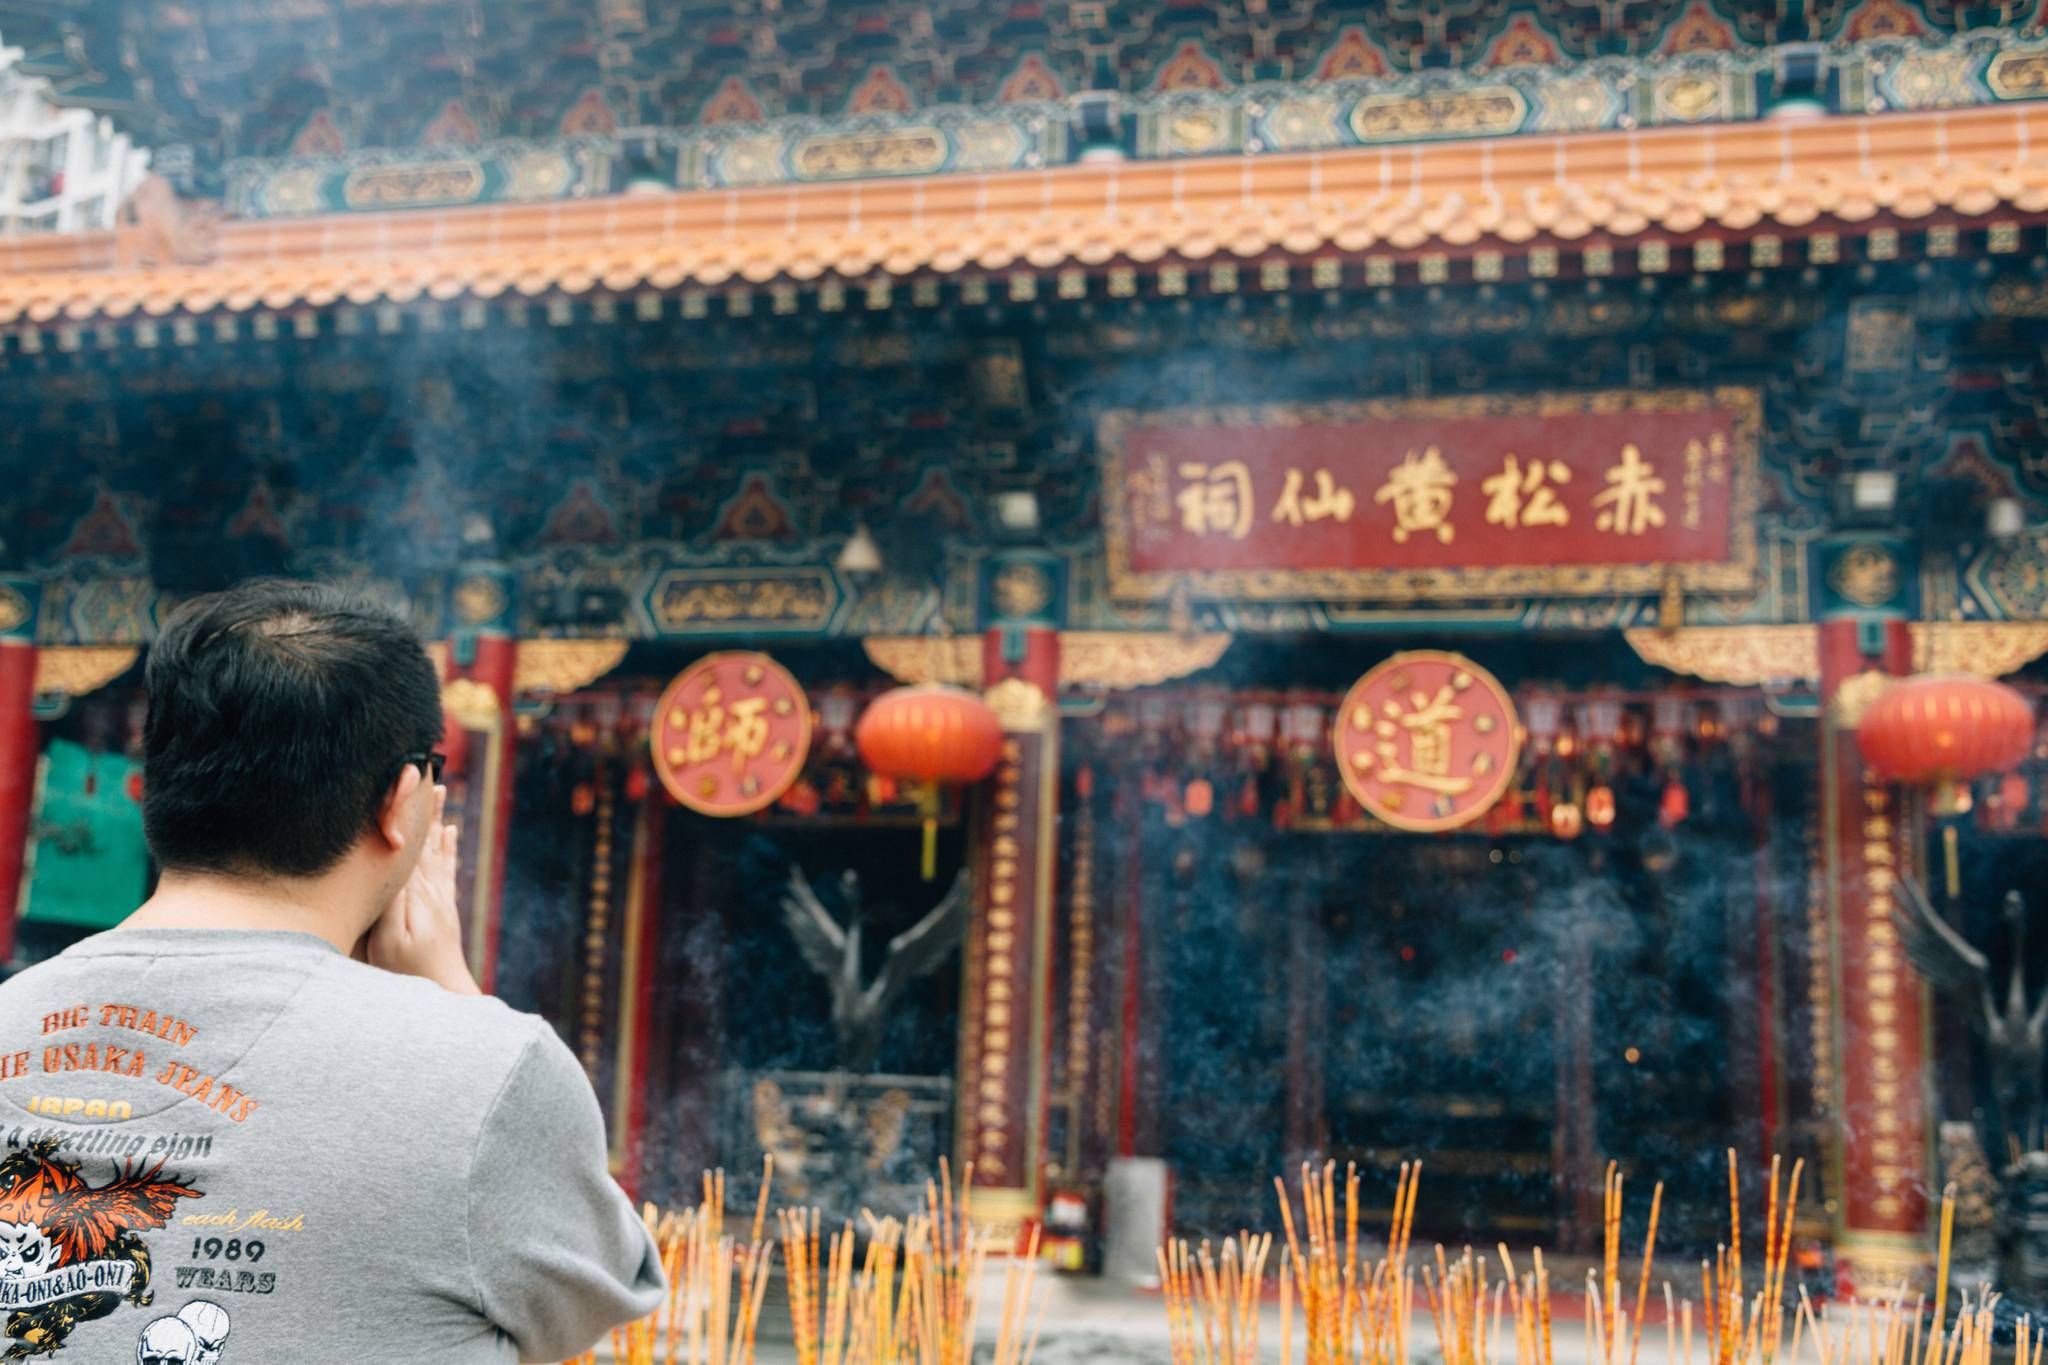 Chinese youths flock to temples as a form of escapism